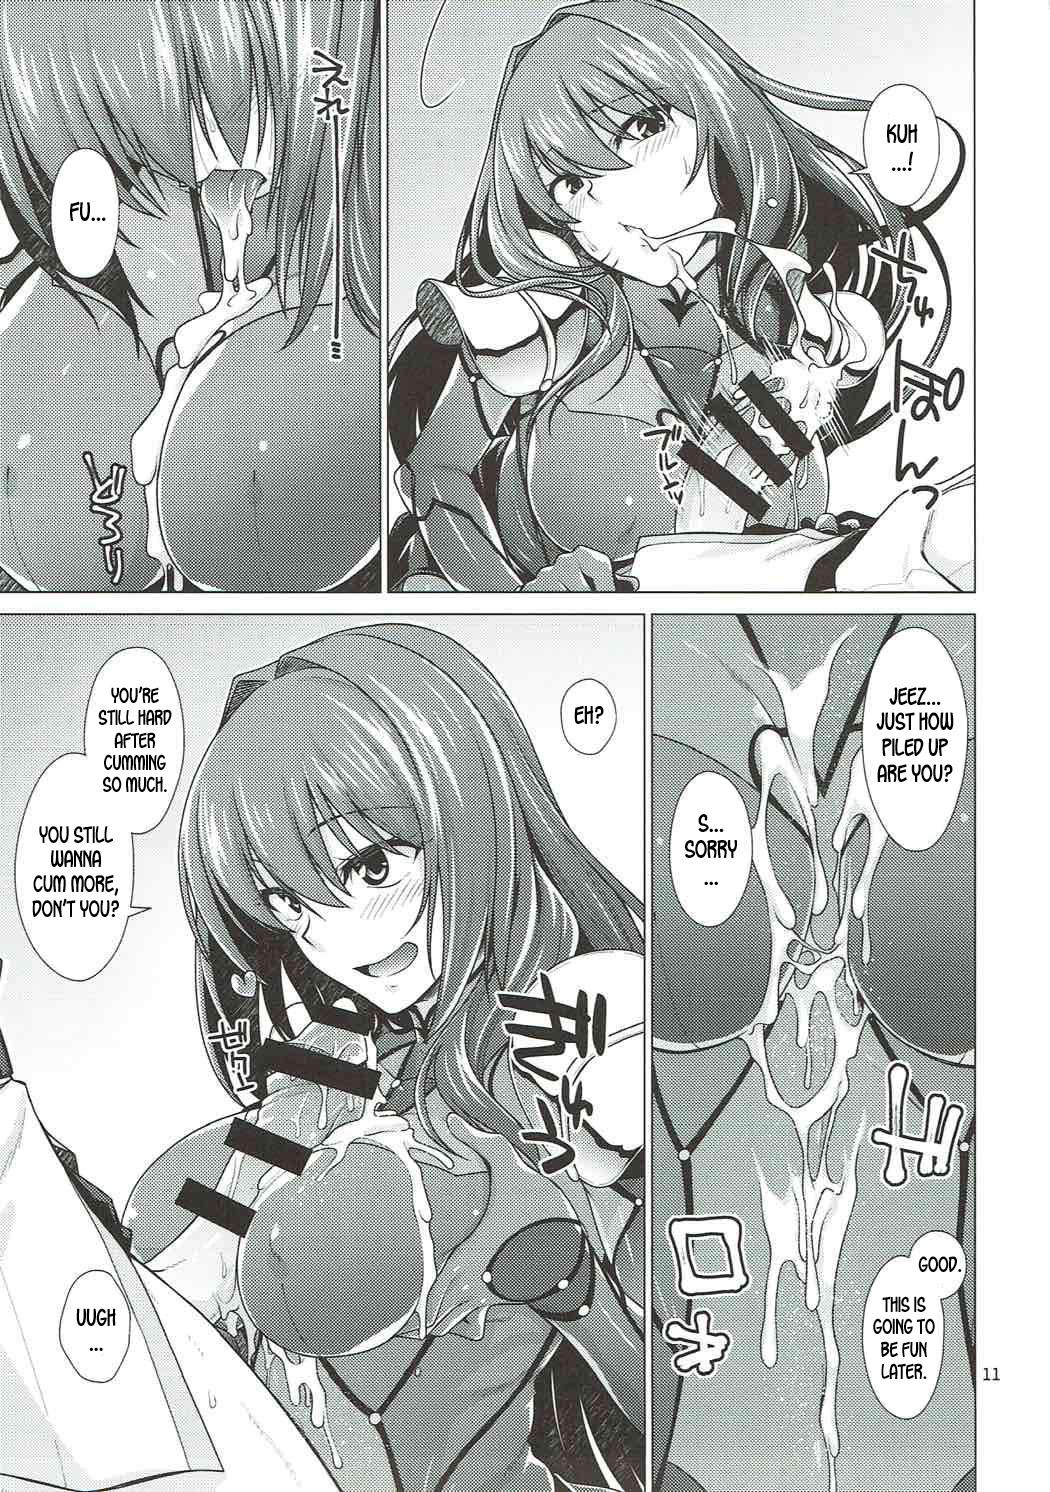 Sesso Scathach Shishou to Celt Shiki Gachihamex! - Fate grand order Chat - Page 10